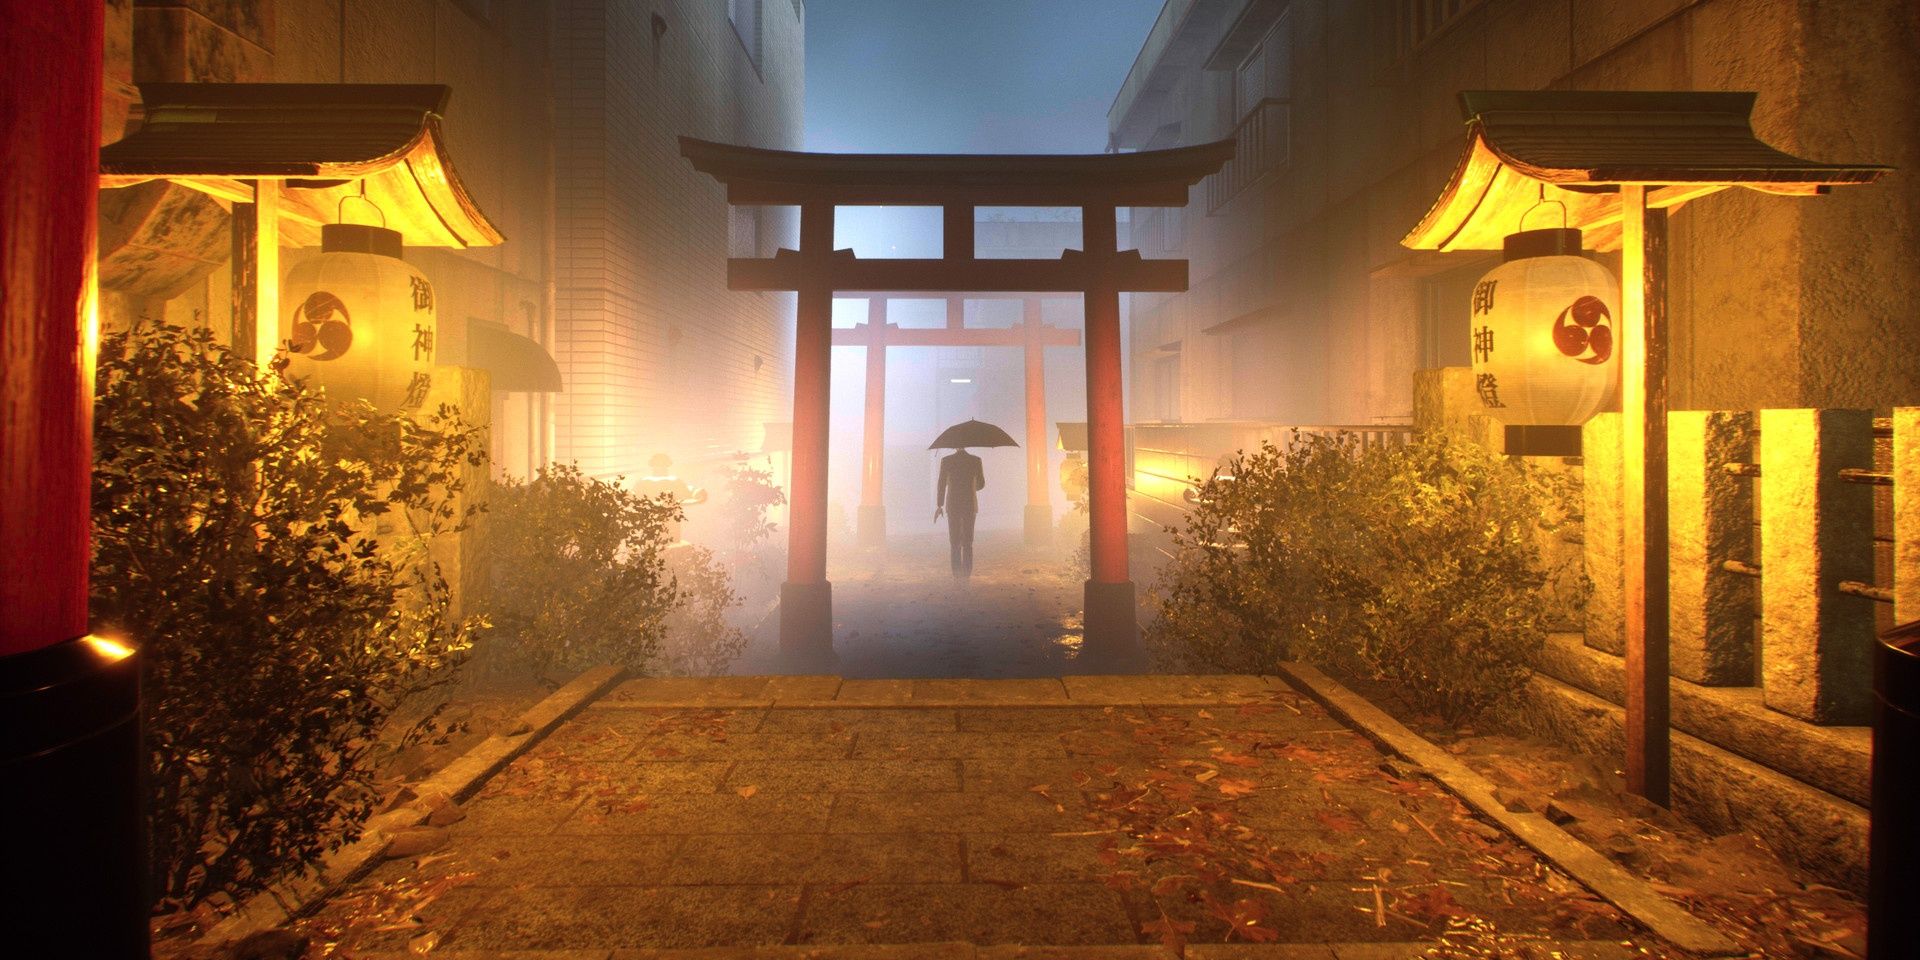 A screenshot showing the silhouette of a man with an umbrella in a deserted alleyway in Ghostwire: Tokyo.